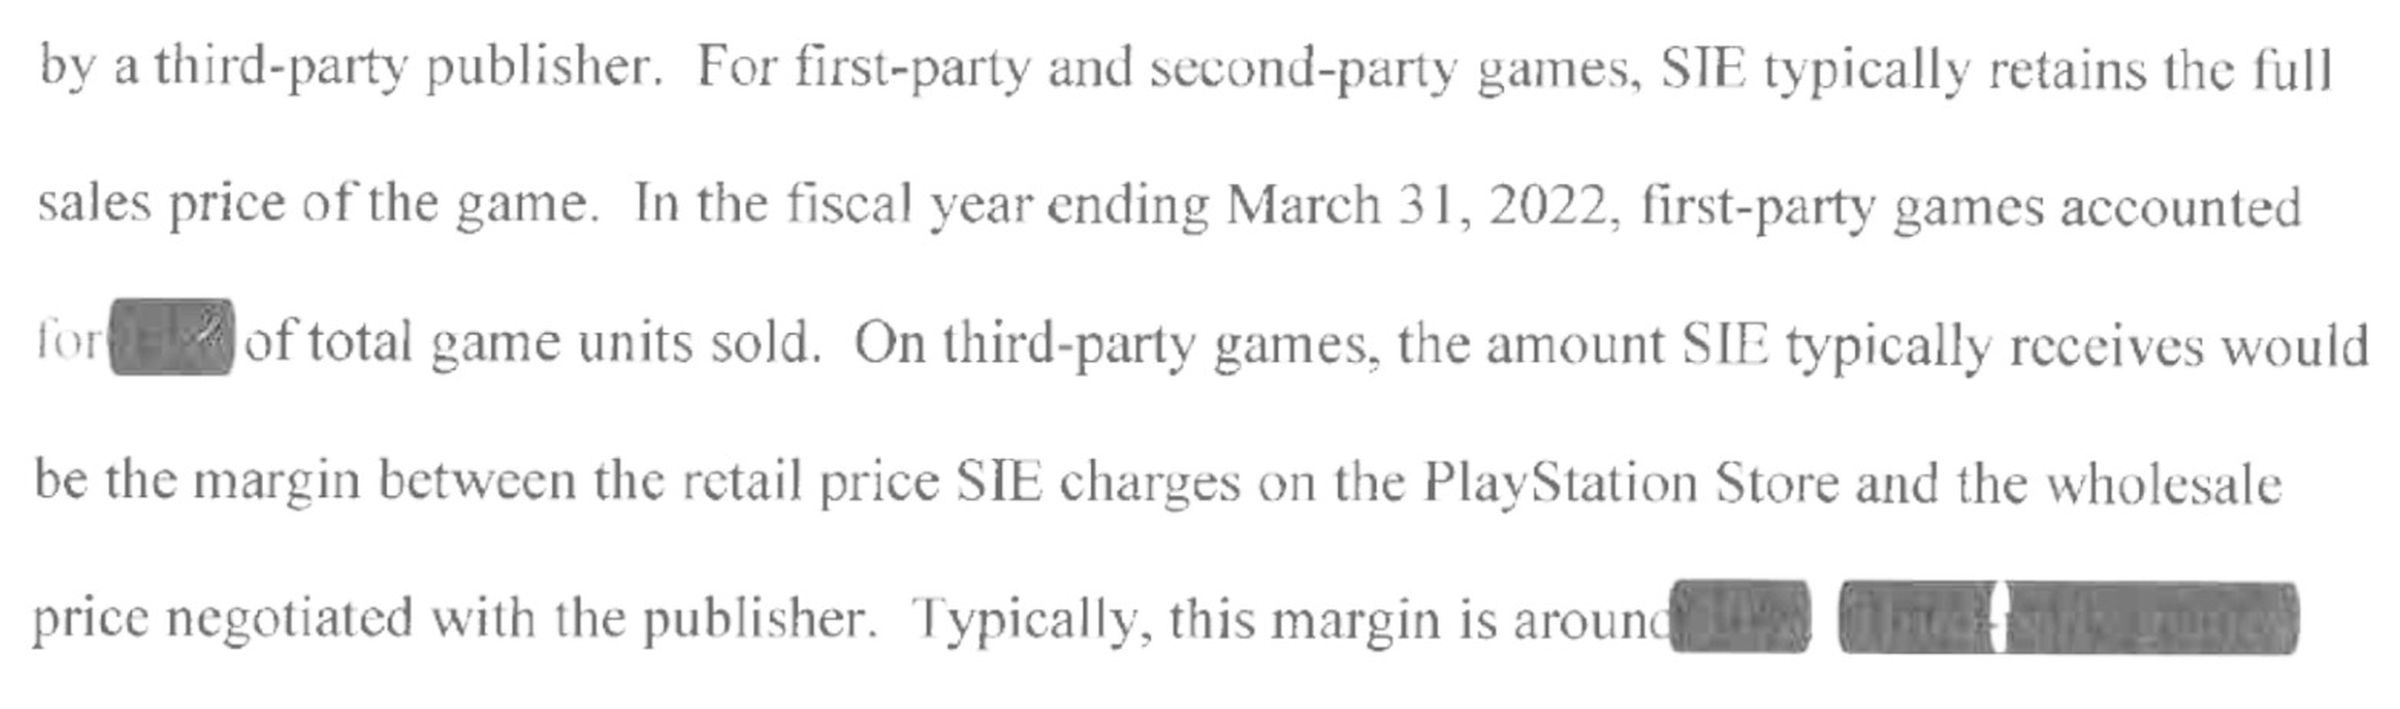 Does that first bit say 14 percent of PlayStation games sold are Sony’s own first-party games? We’re not quite sure, but comparing to other numbers in the document it looks like “1” and “4”. 